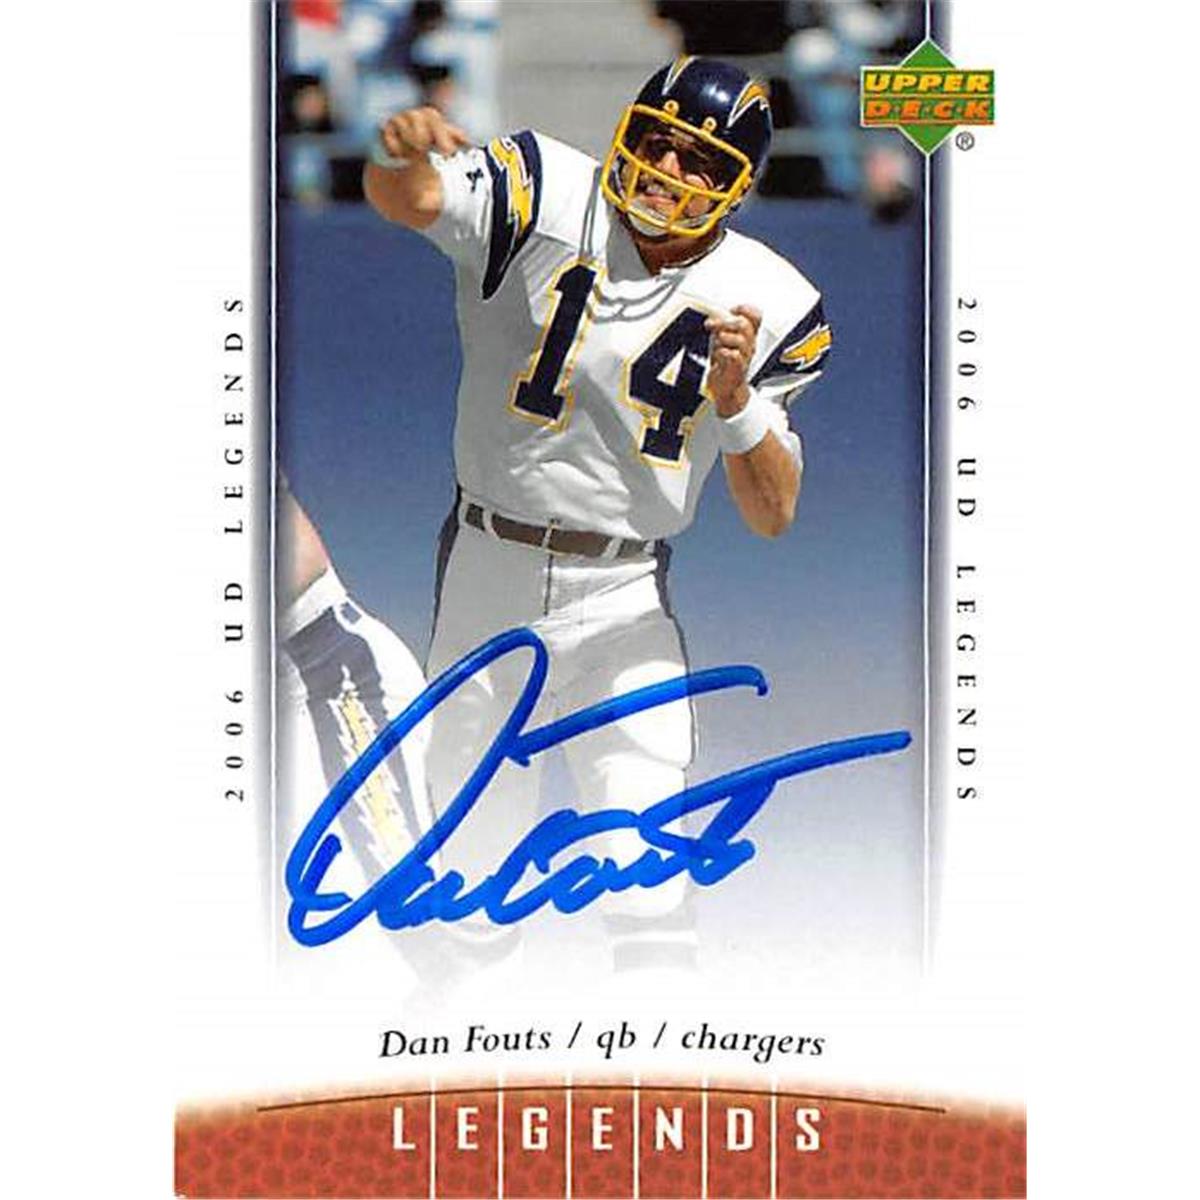 Picture of Autograph Warehouse 409872 Dan Fouts Autographed Football Card - 2006 Upper Deck Legends 11